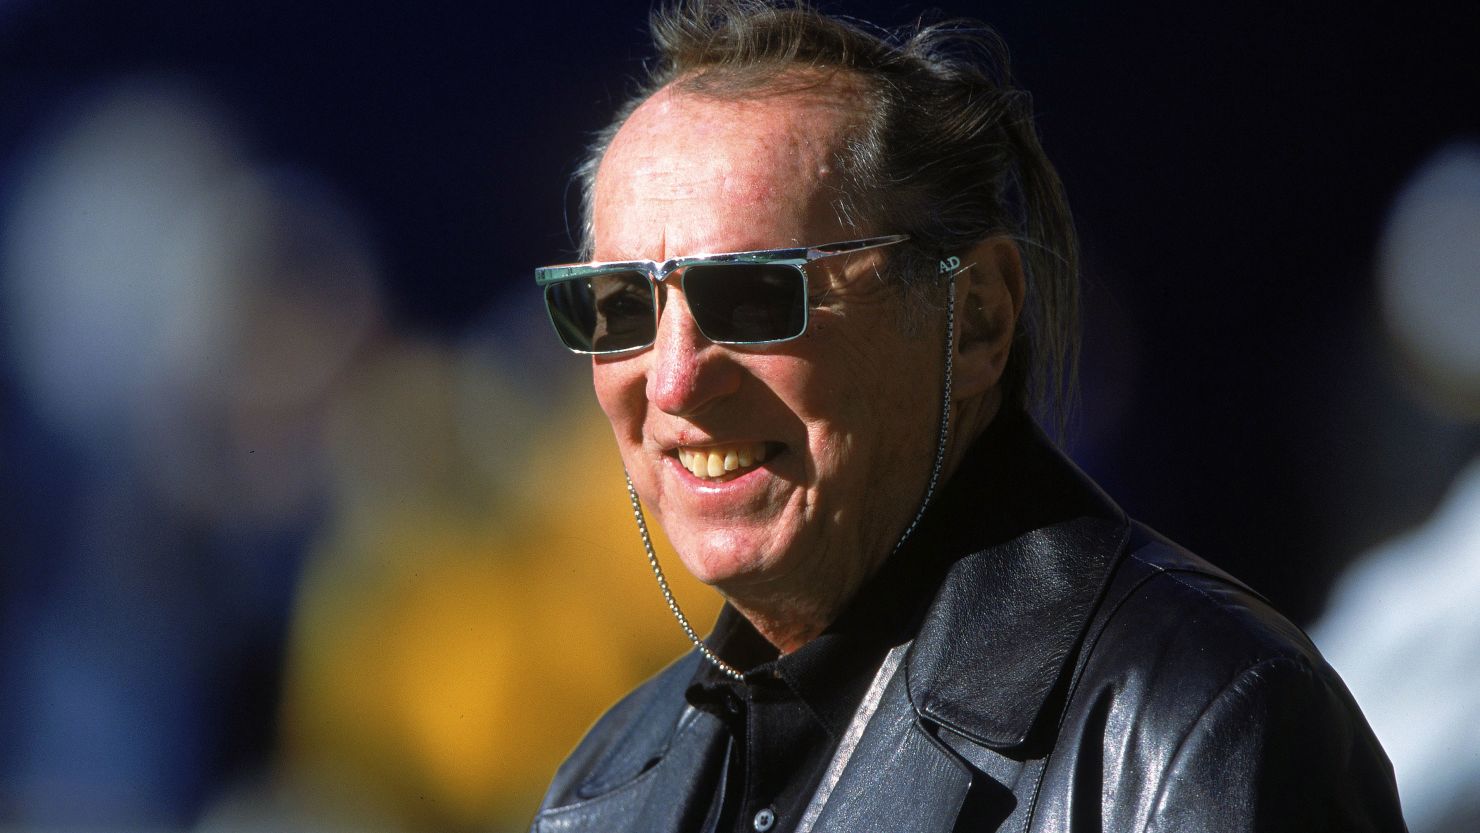 Al Davis was inducted into the Football Hall of Fame in 1992.